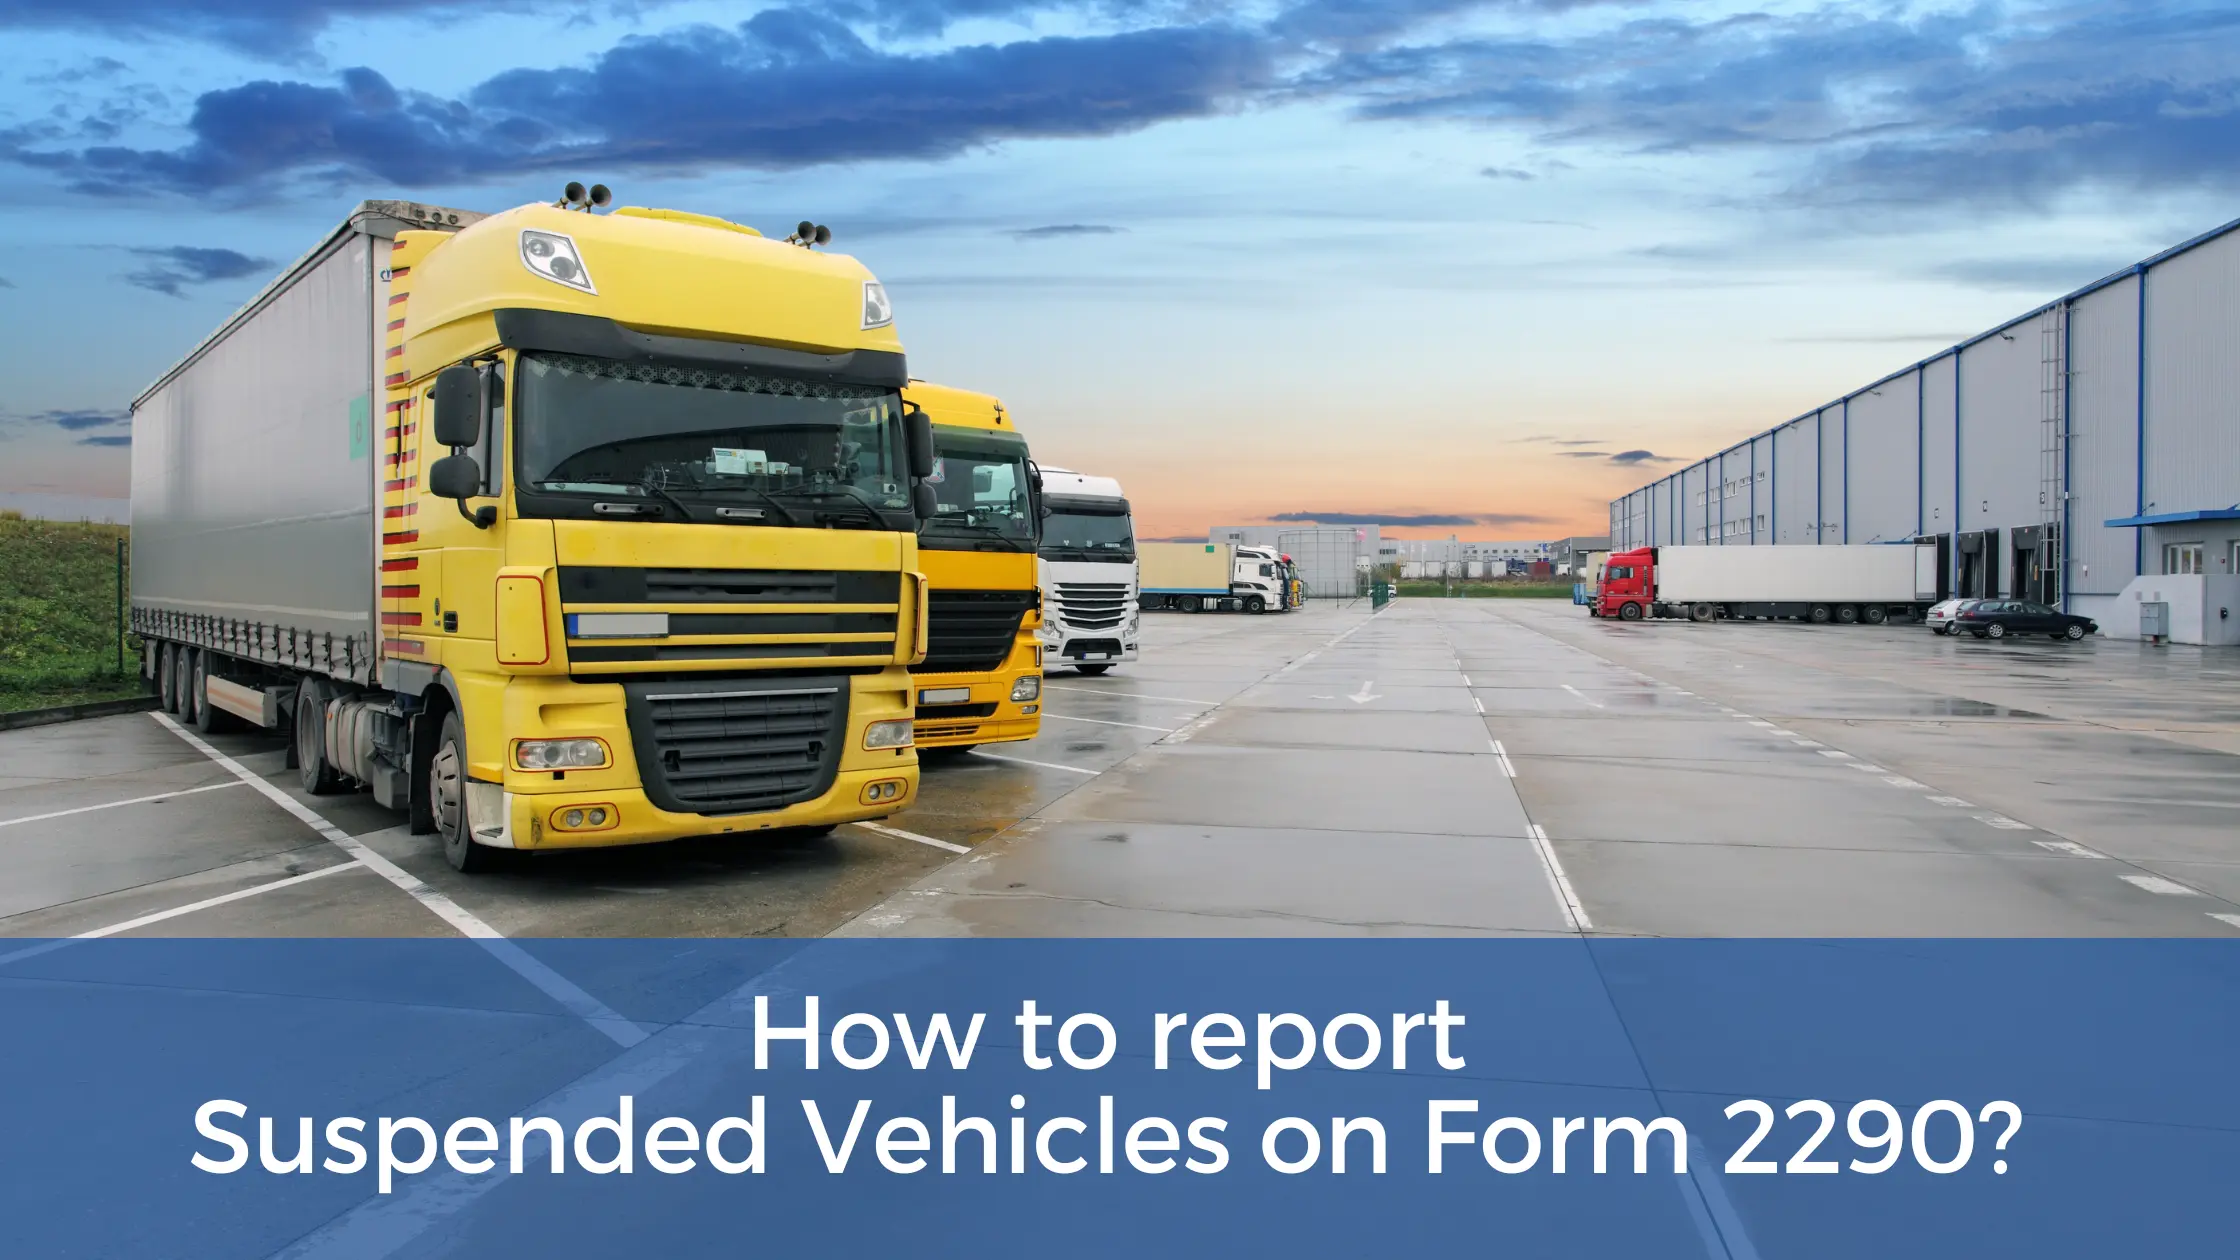 How to File Form 2290 for Suspended Vehicles